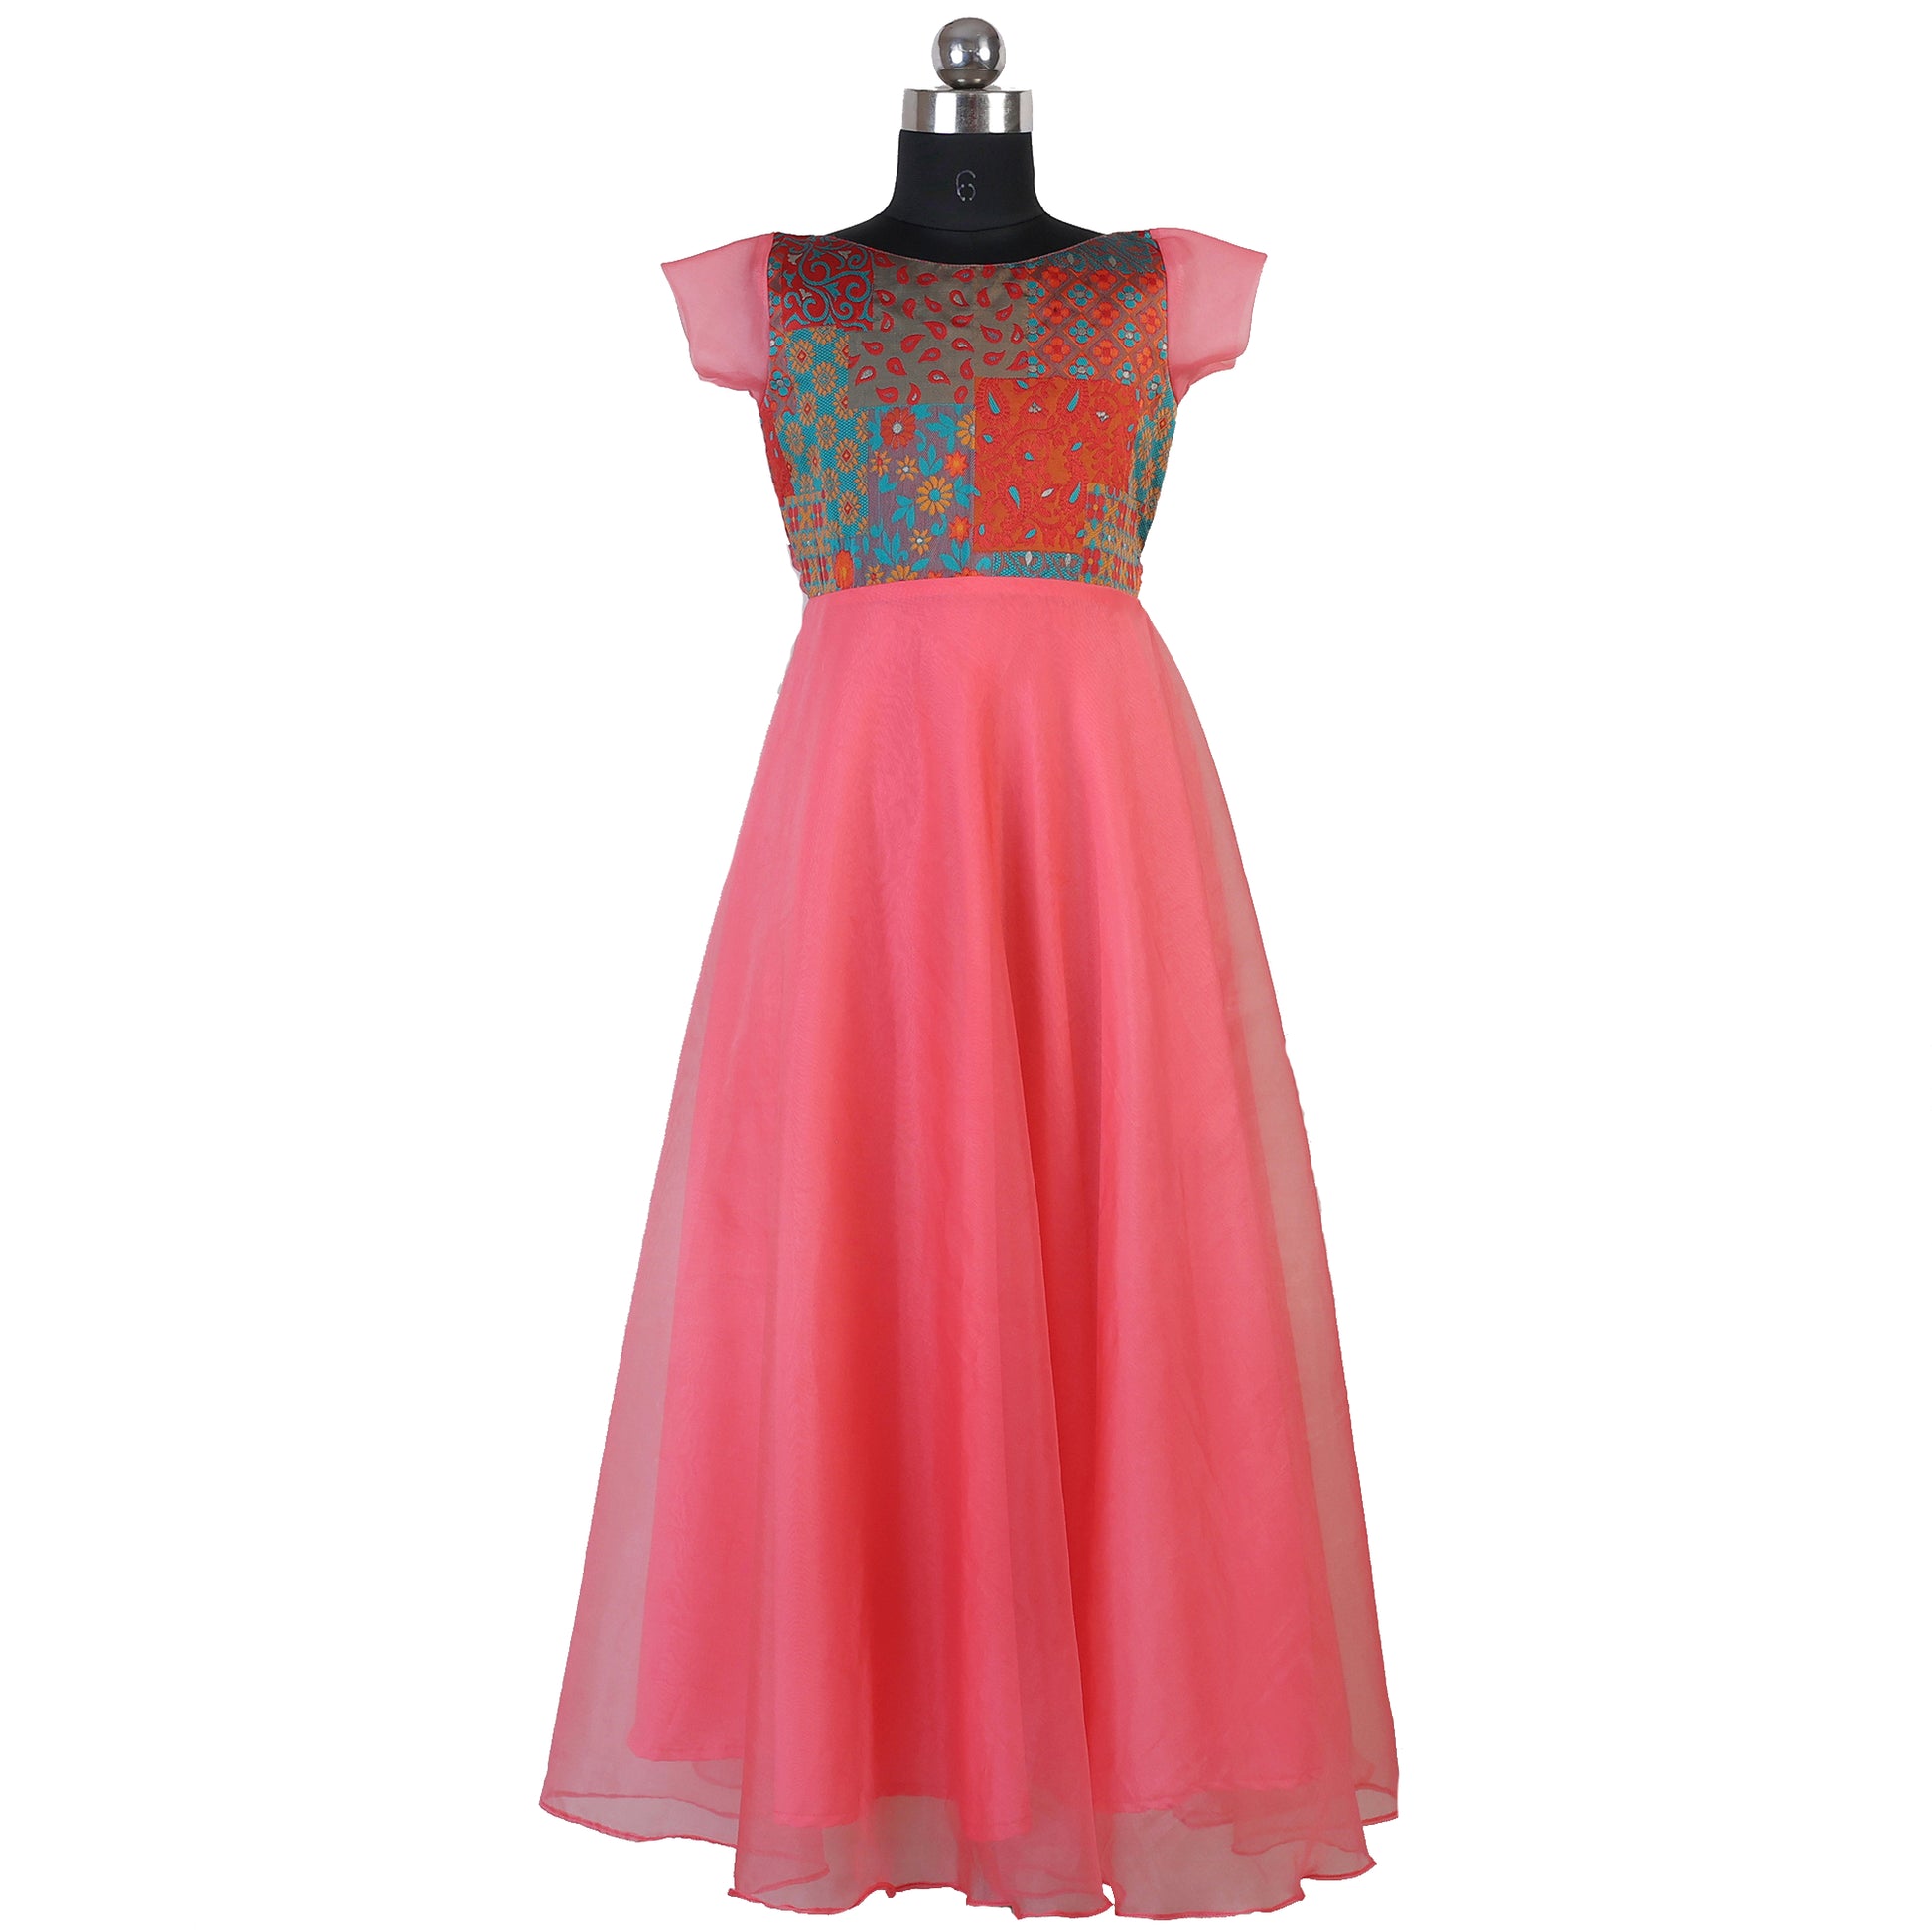 Designer frock new party wear dresses for kids indo western gown party wear green brocade 7 year olds birthday frocks childrens party wear dress peach organza birthday outfit at heykidoo online peach organza maxi dress for kids